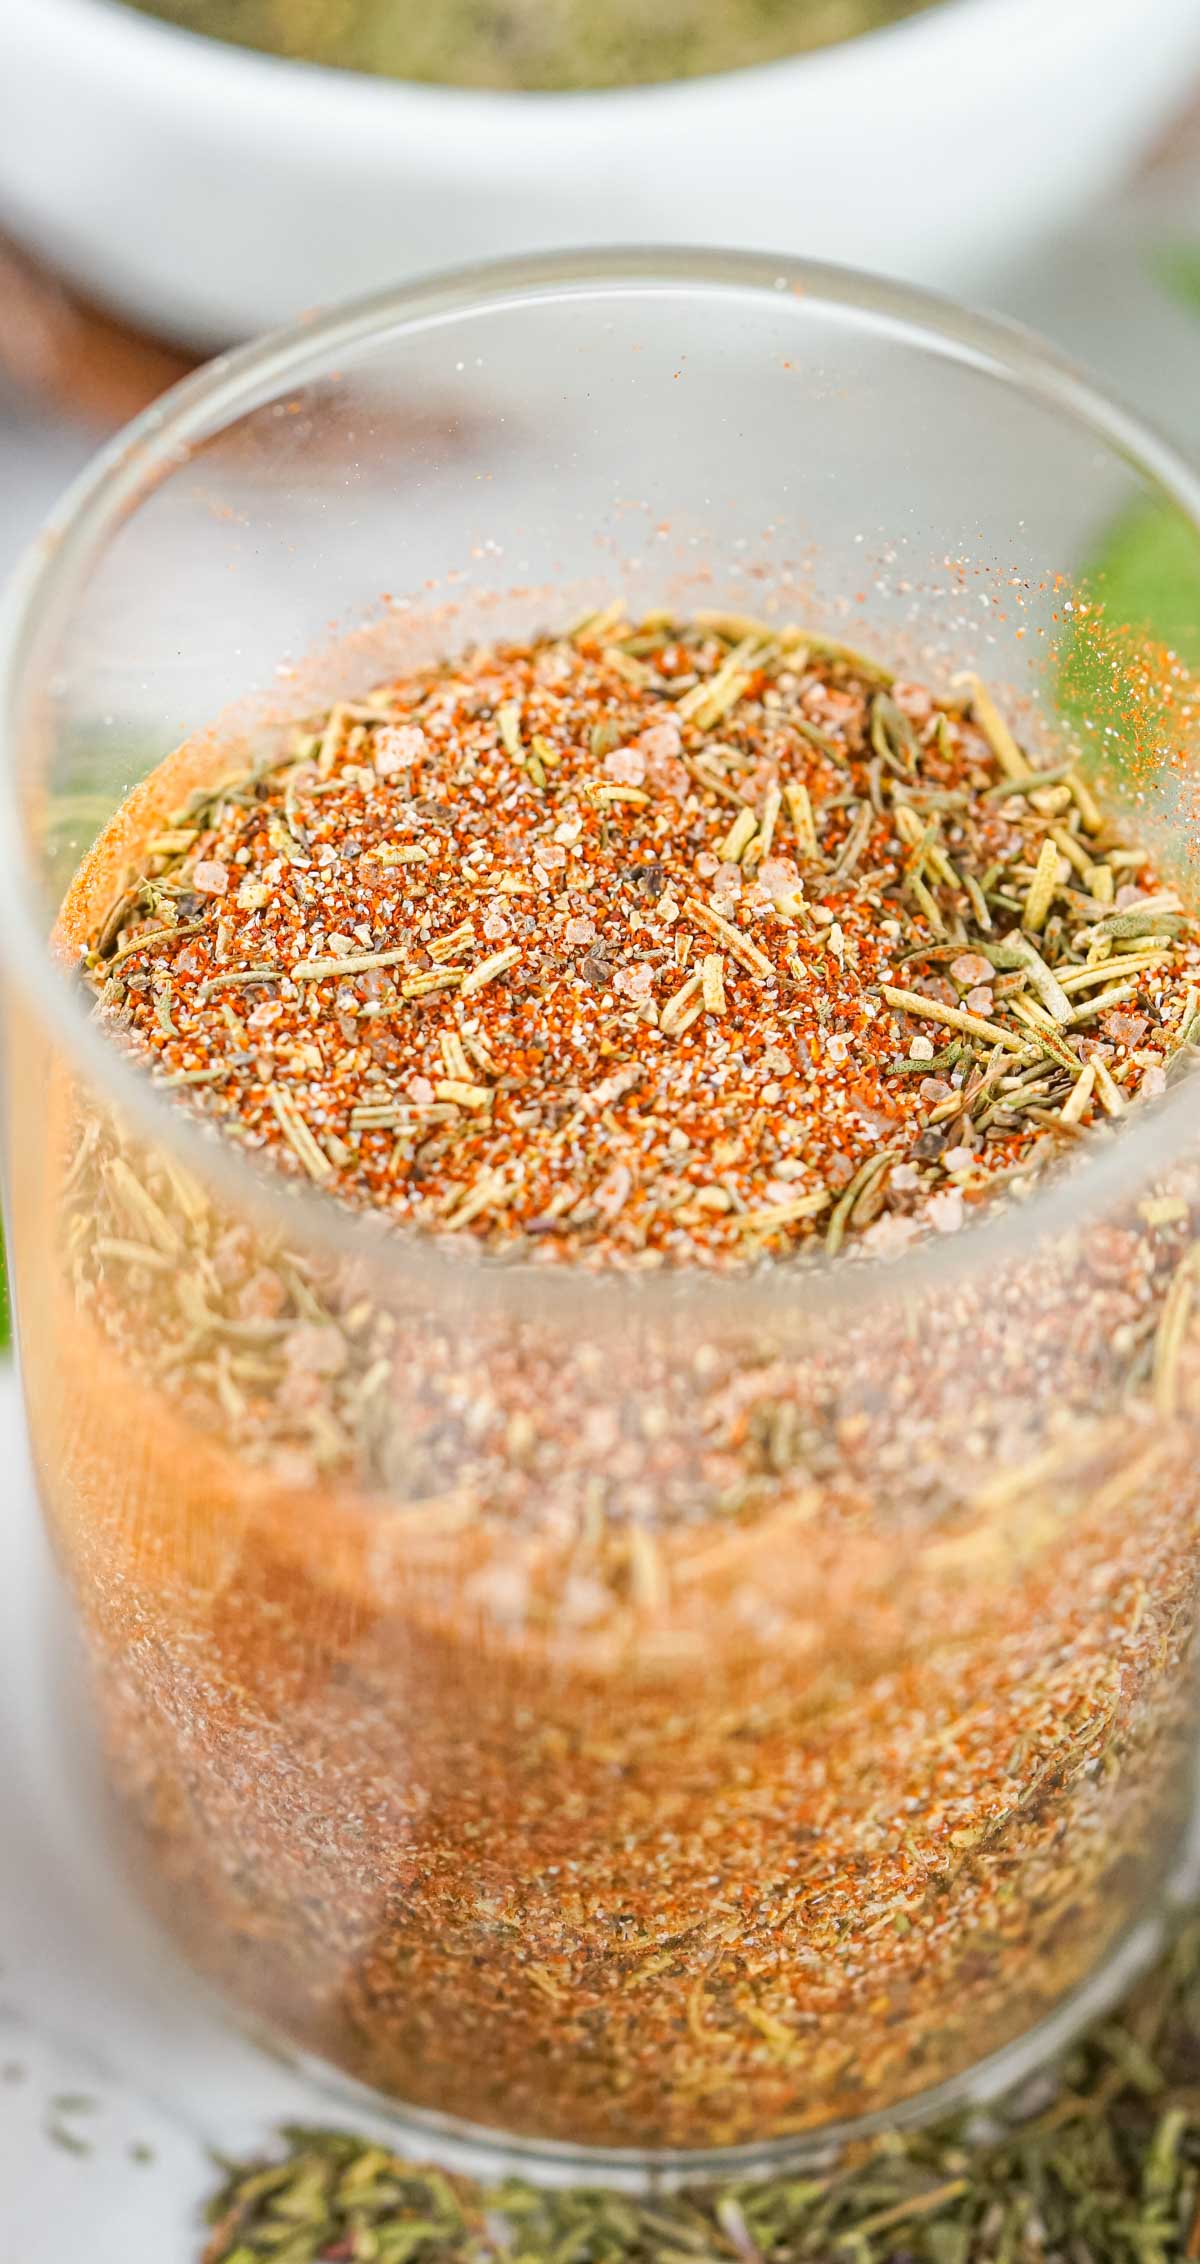 A spice jar filled with various spices.